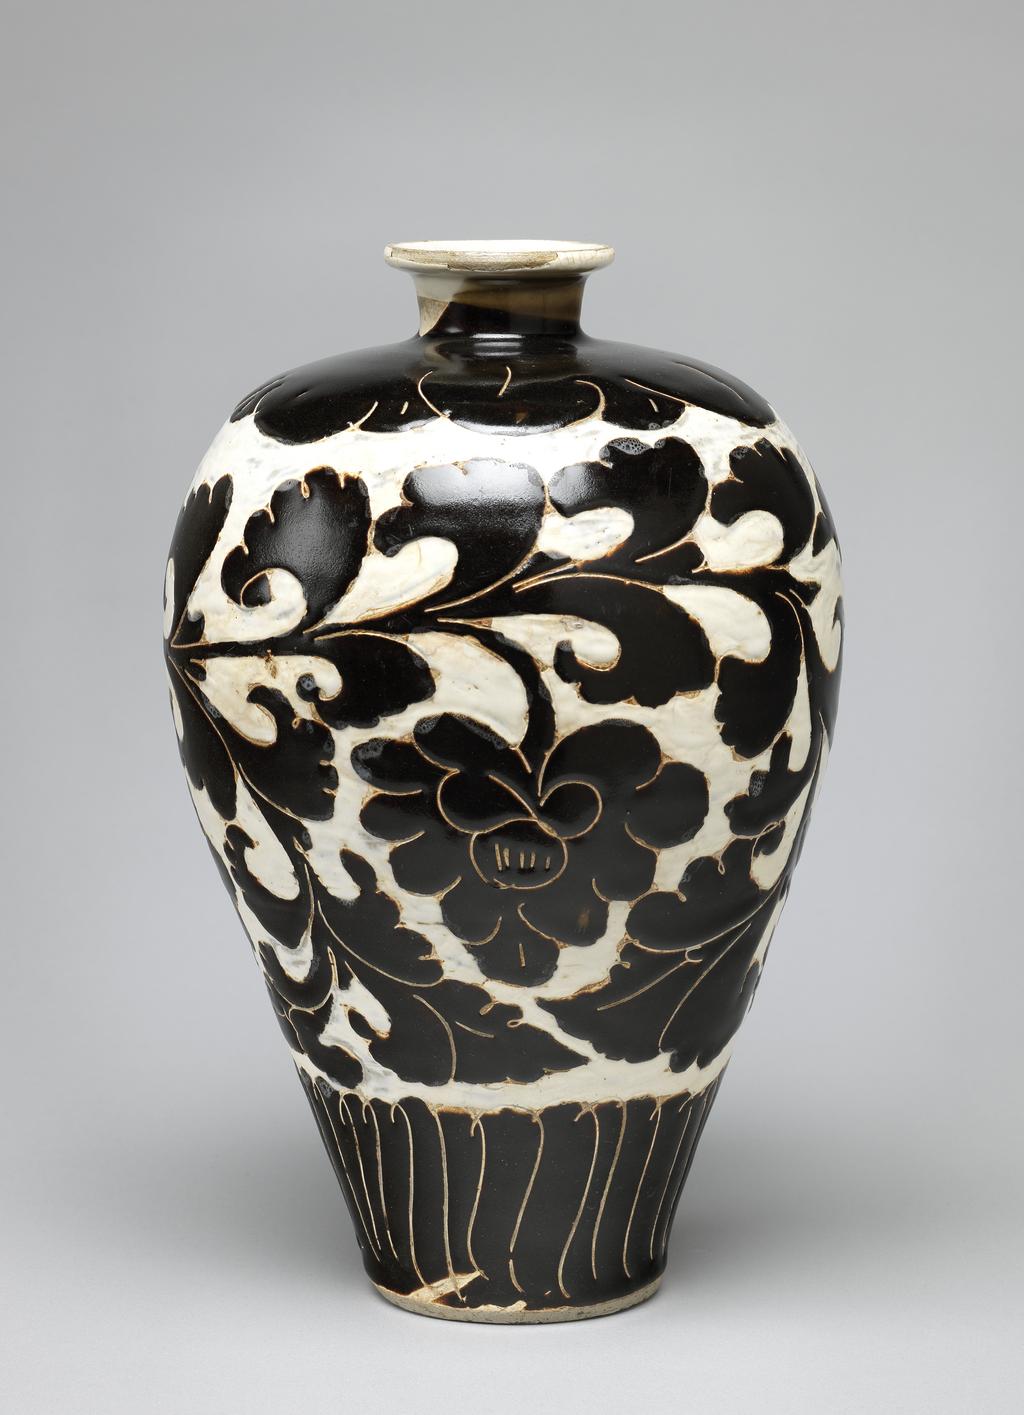 An image of Vase. Tz’u chou ware. Buff stoneware, with incised floral designs painted in dark brown. The ground has been cut away and filled in with white. Height 29.2 cm, diameter 19.1 cm, 960-1280. Song Dynasty (960-1279). Chinese.